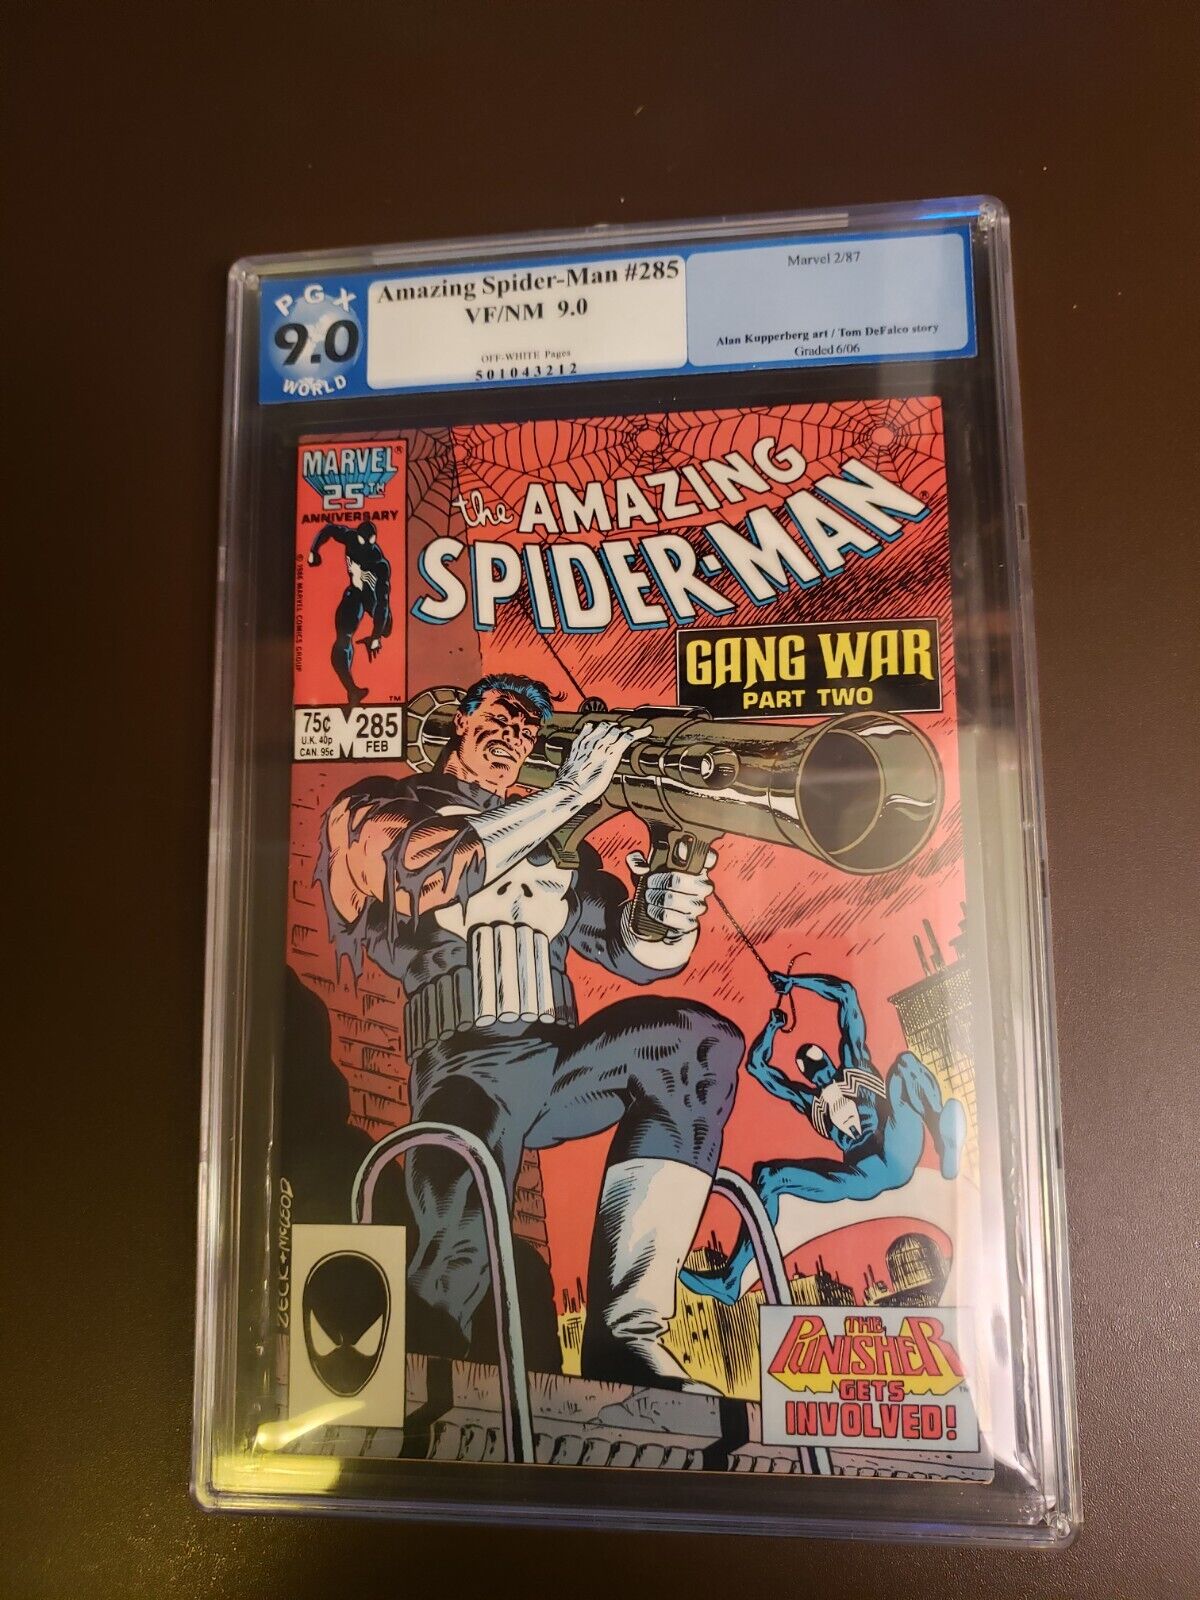 Amazing Spider-Man # 285 Comic Book PGX Graded 9.0 not cgc (Punisher Appearance)